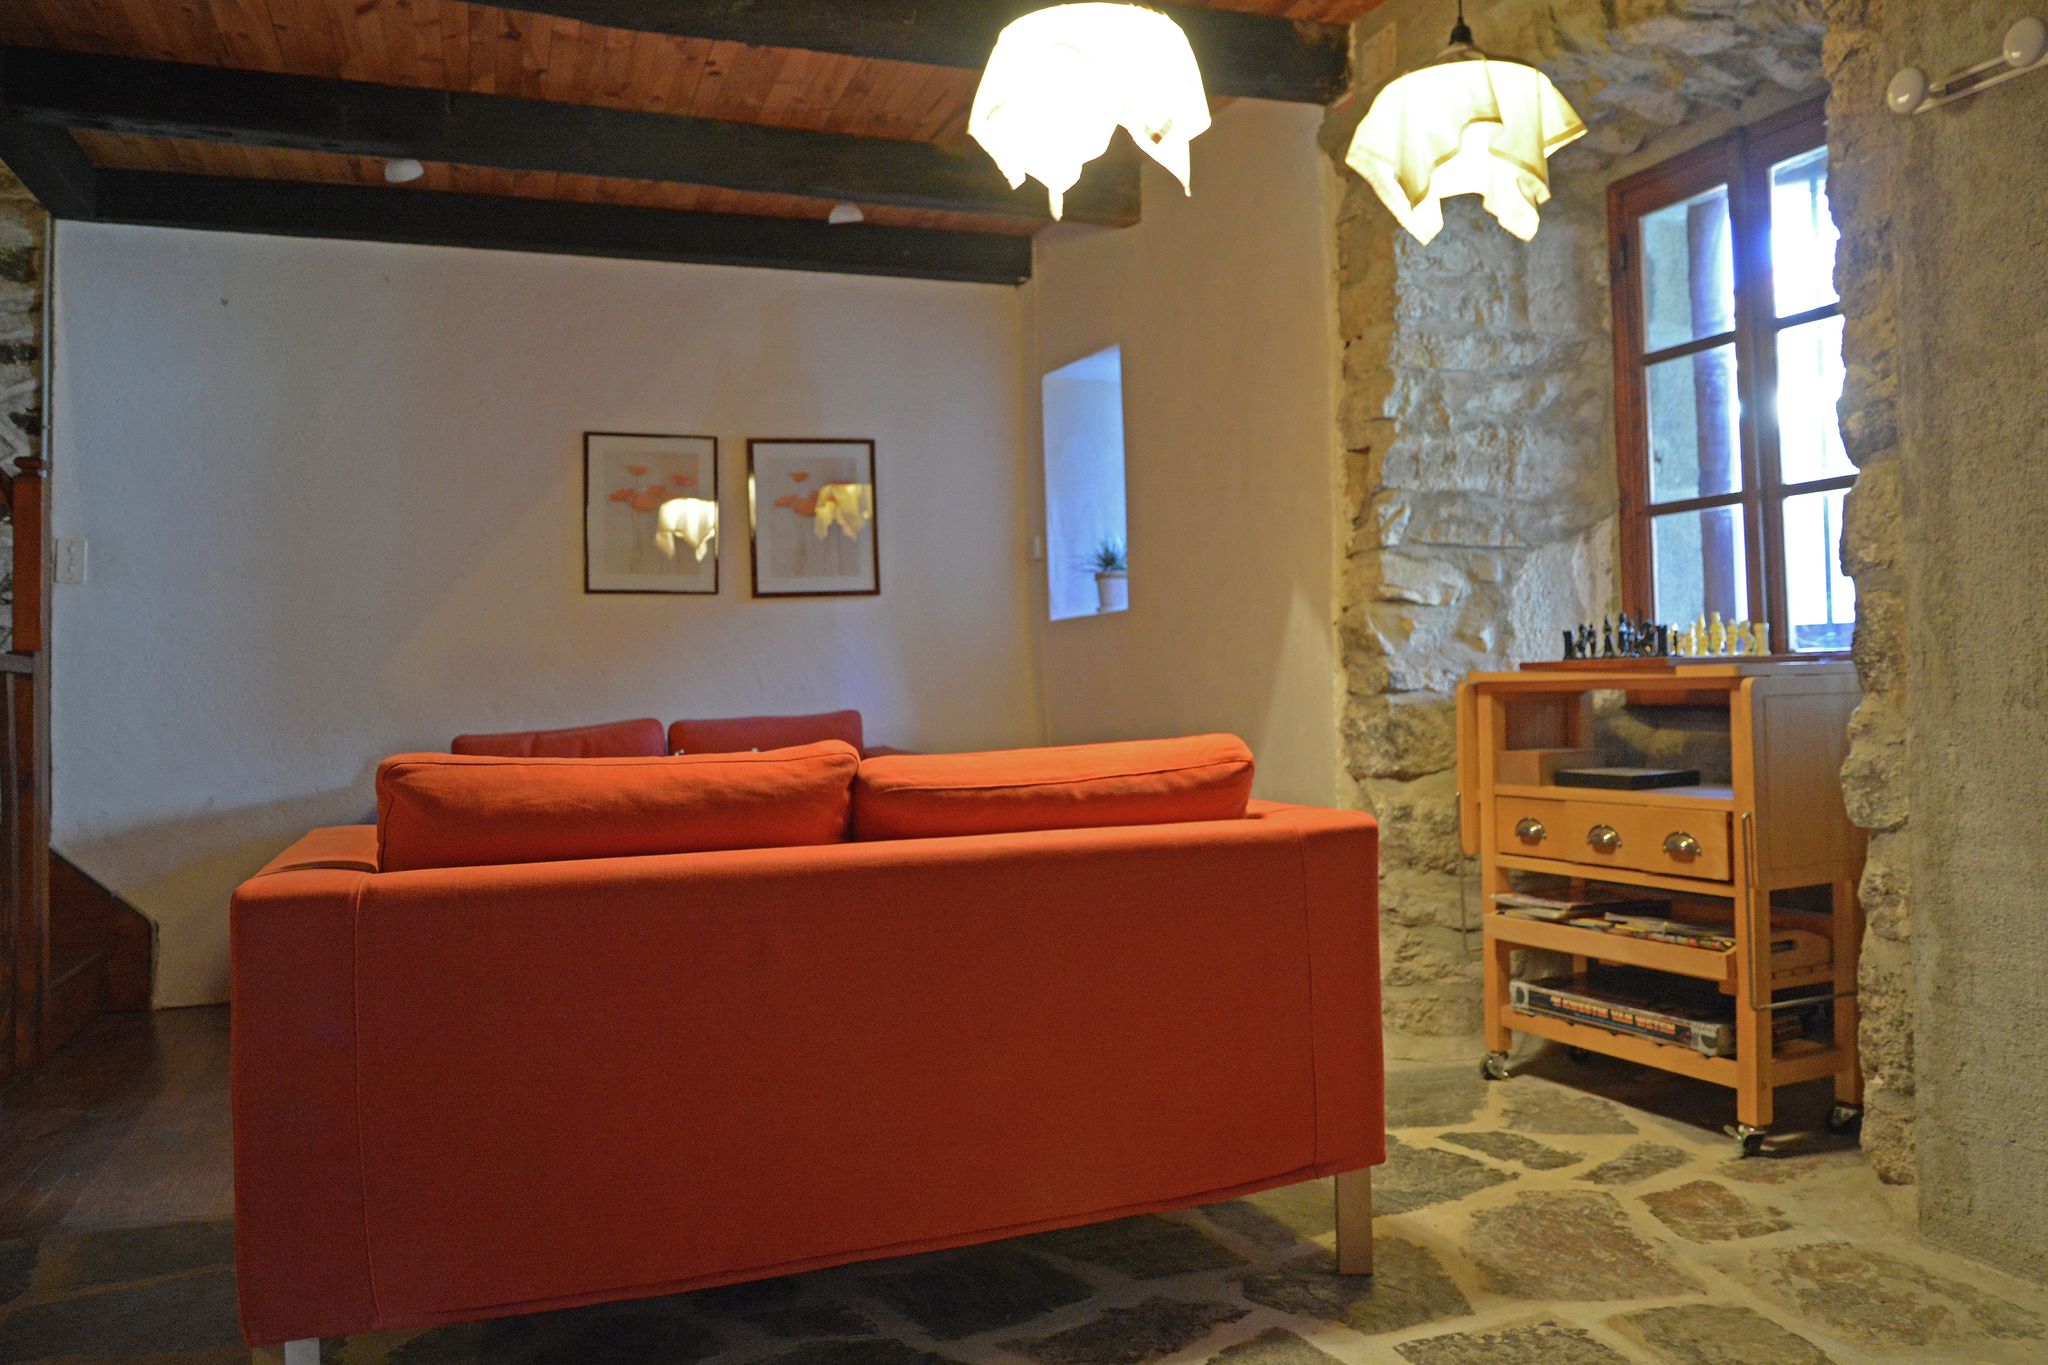 Villa in the Cevennes on the border of the Ardèche and stunning views of a lake